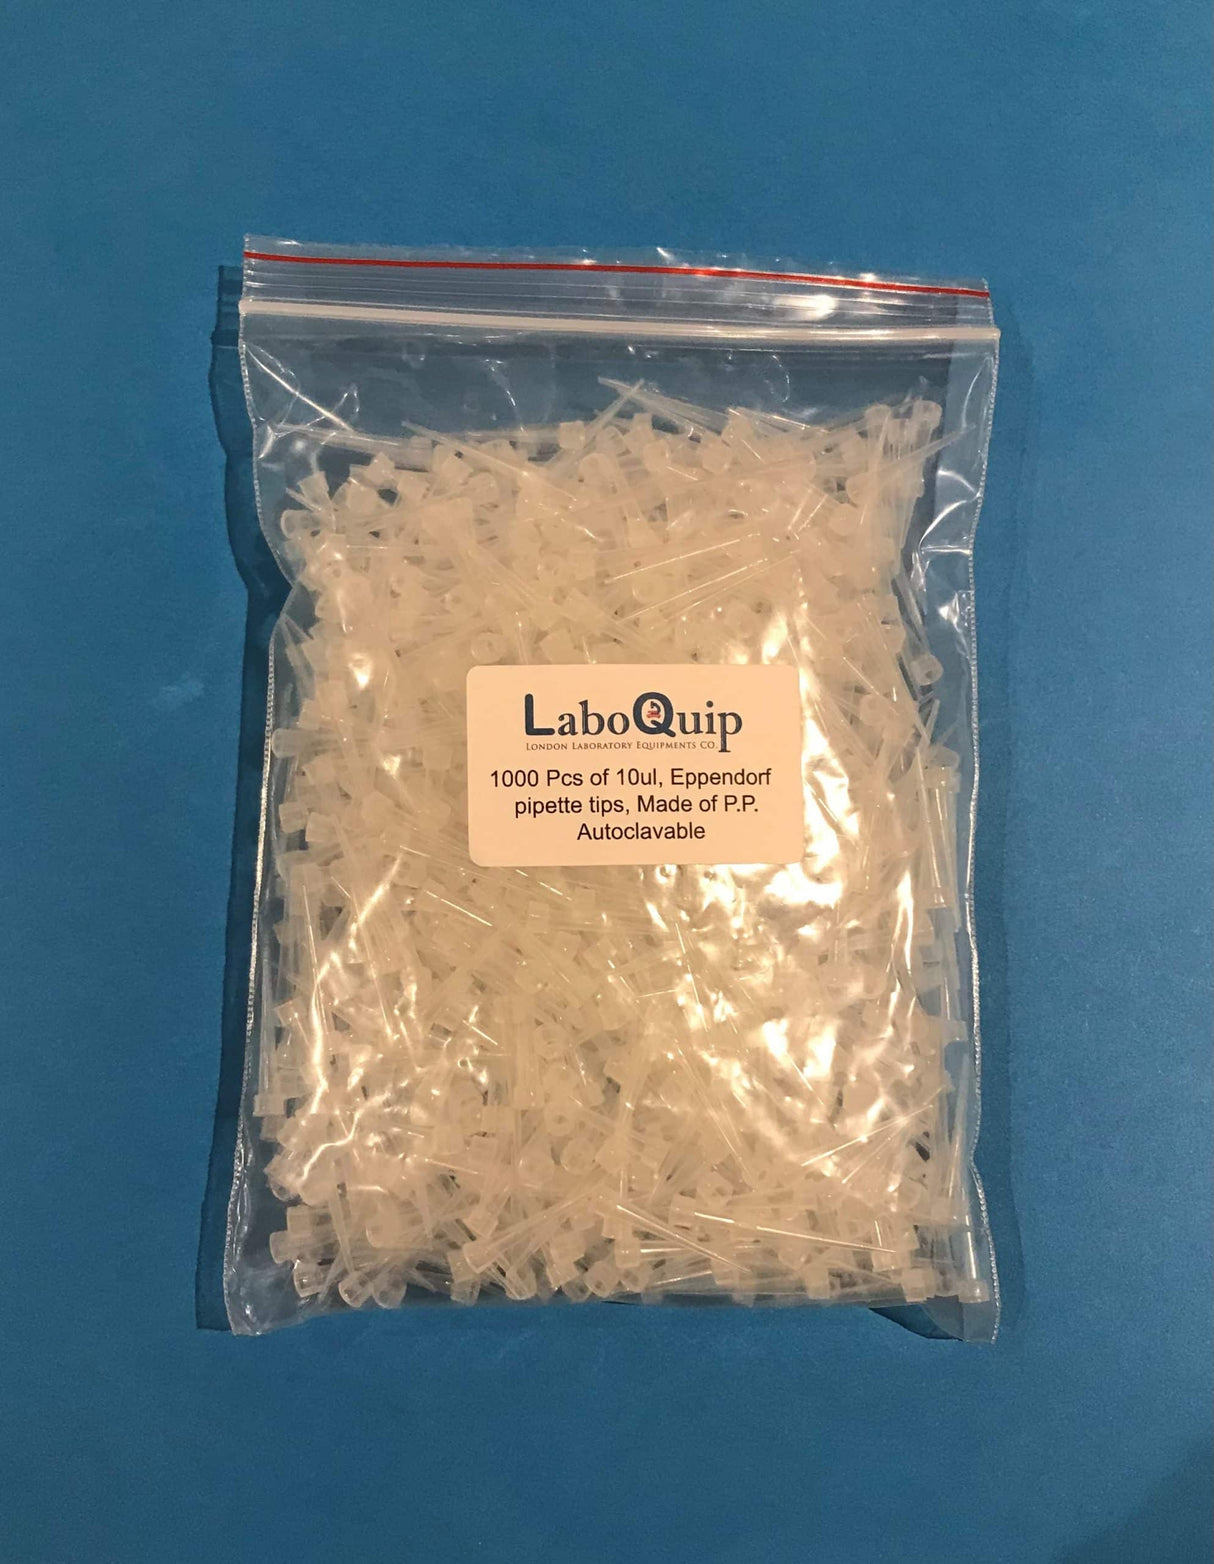 LaboQuip Pipette Tips, 10μl, universal, Extra Long, Eppendorf  (Bag of 1000Pcs)